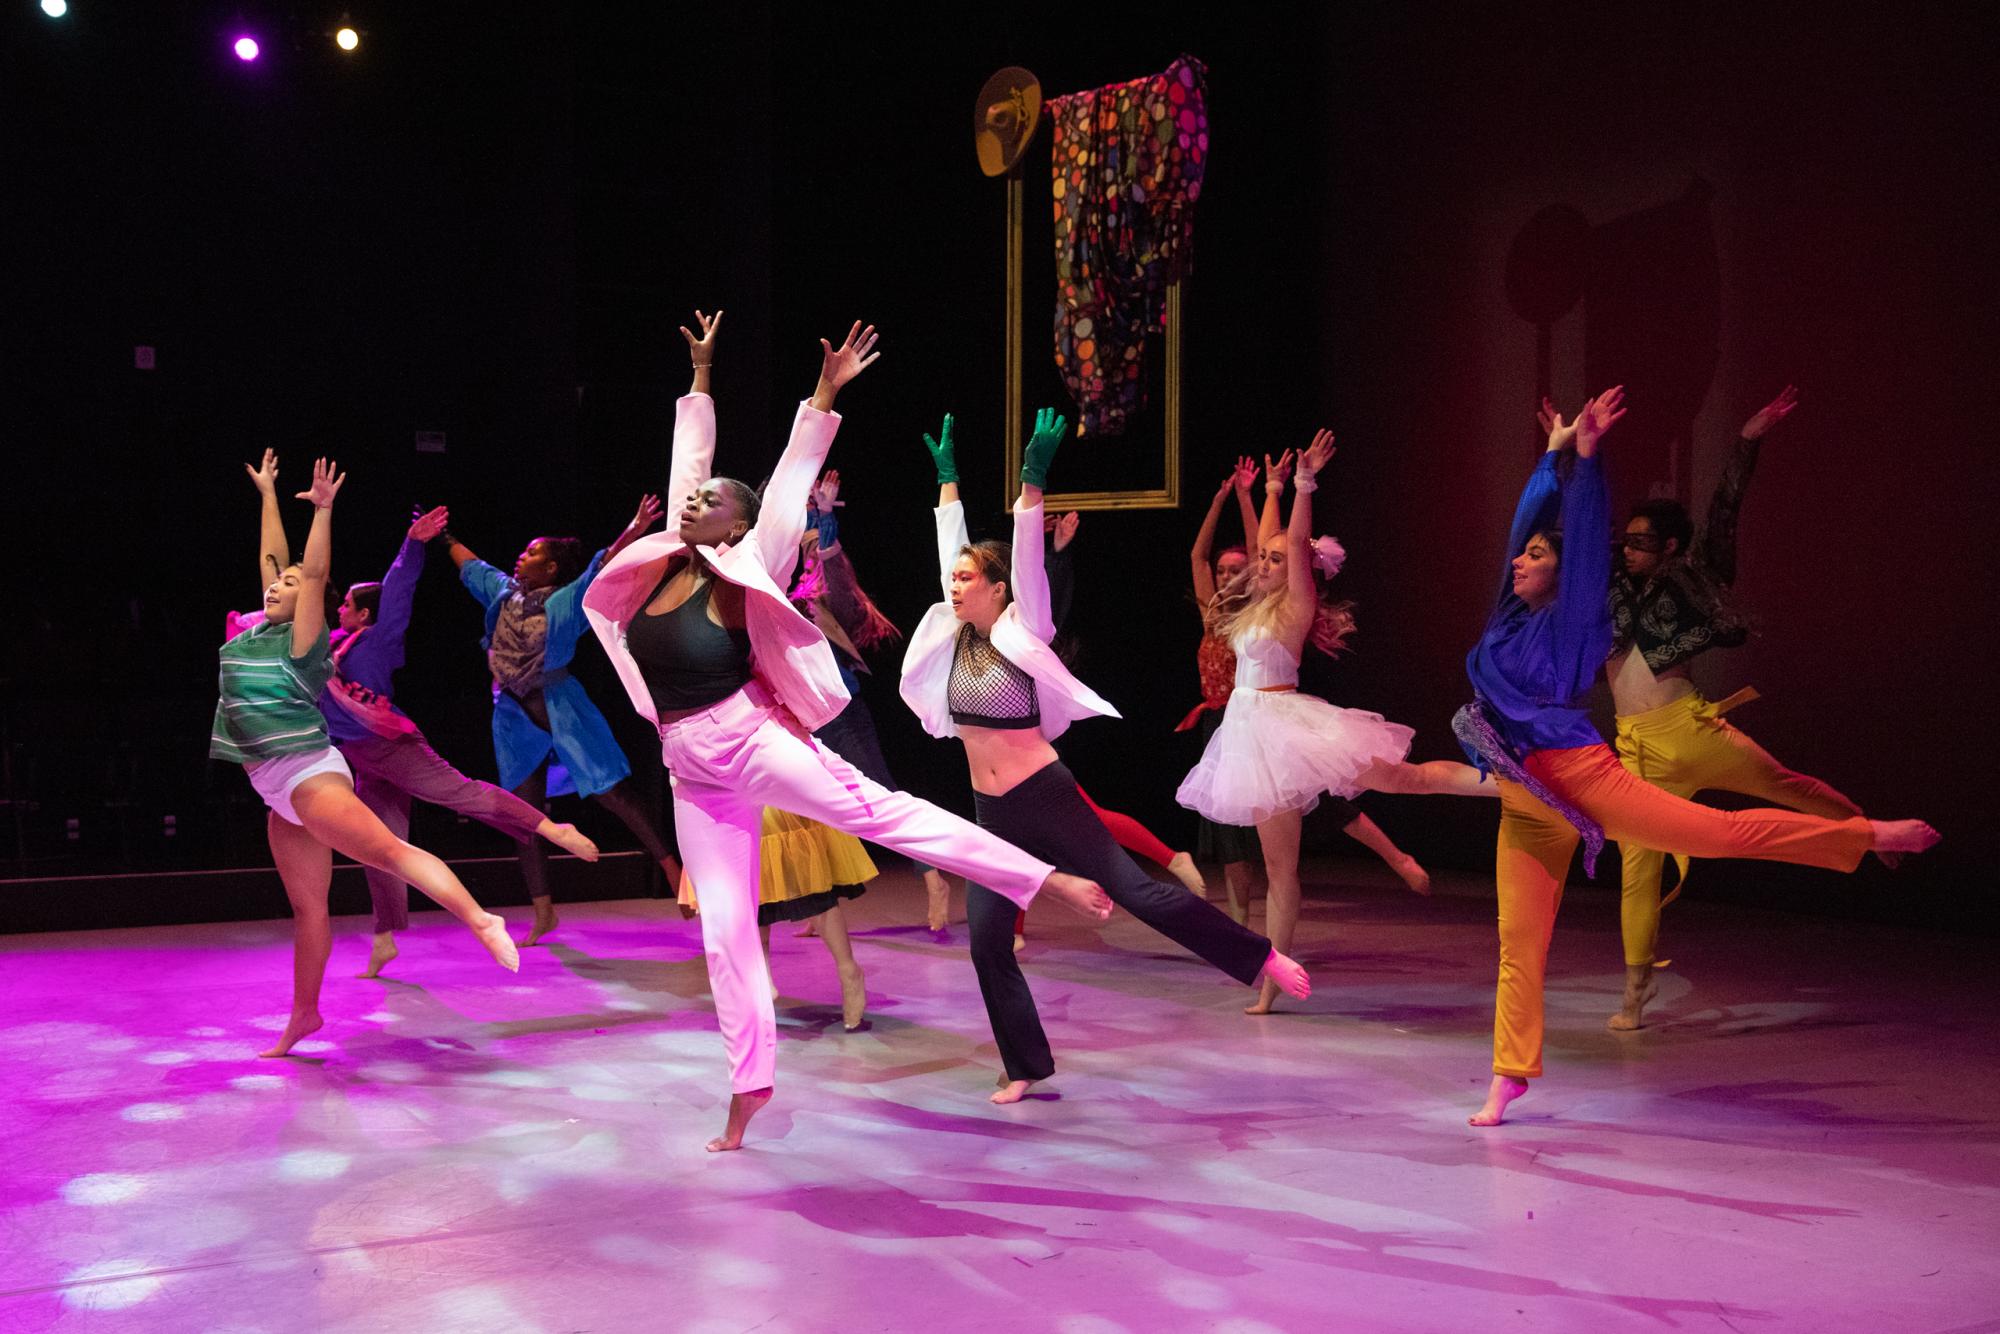 Dancers jump with their arms outstretched above their head